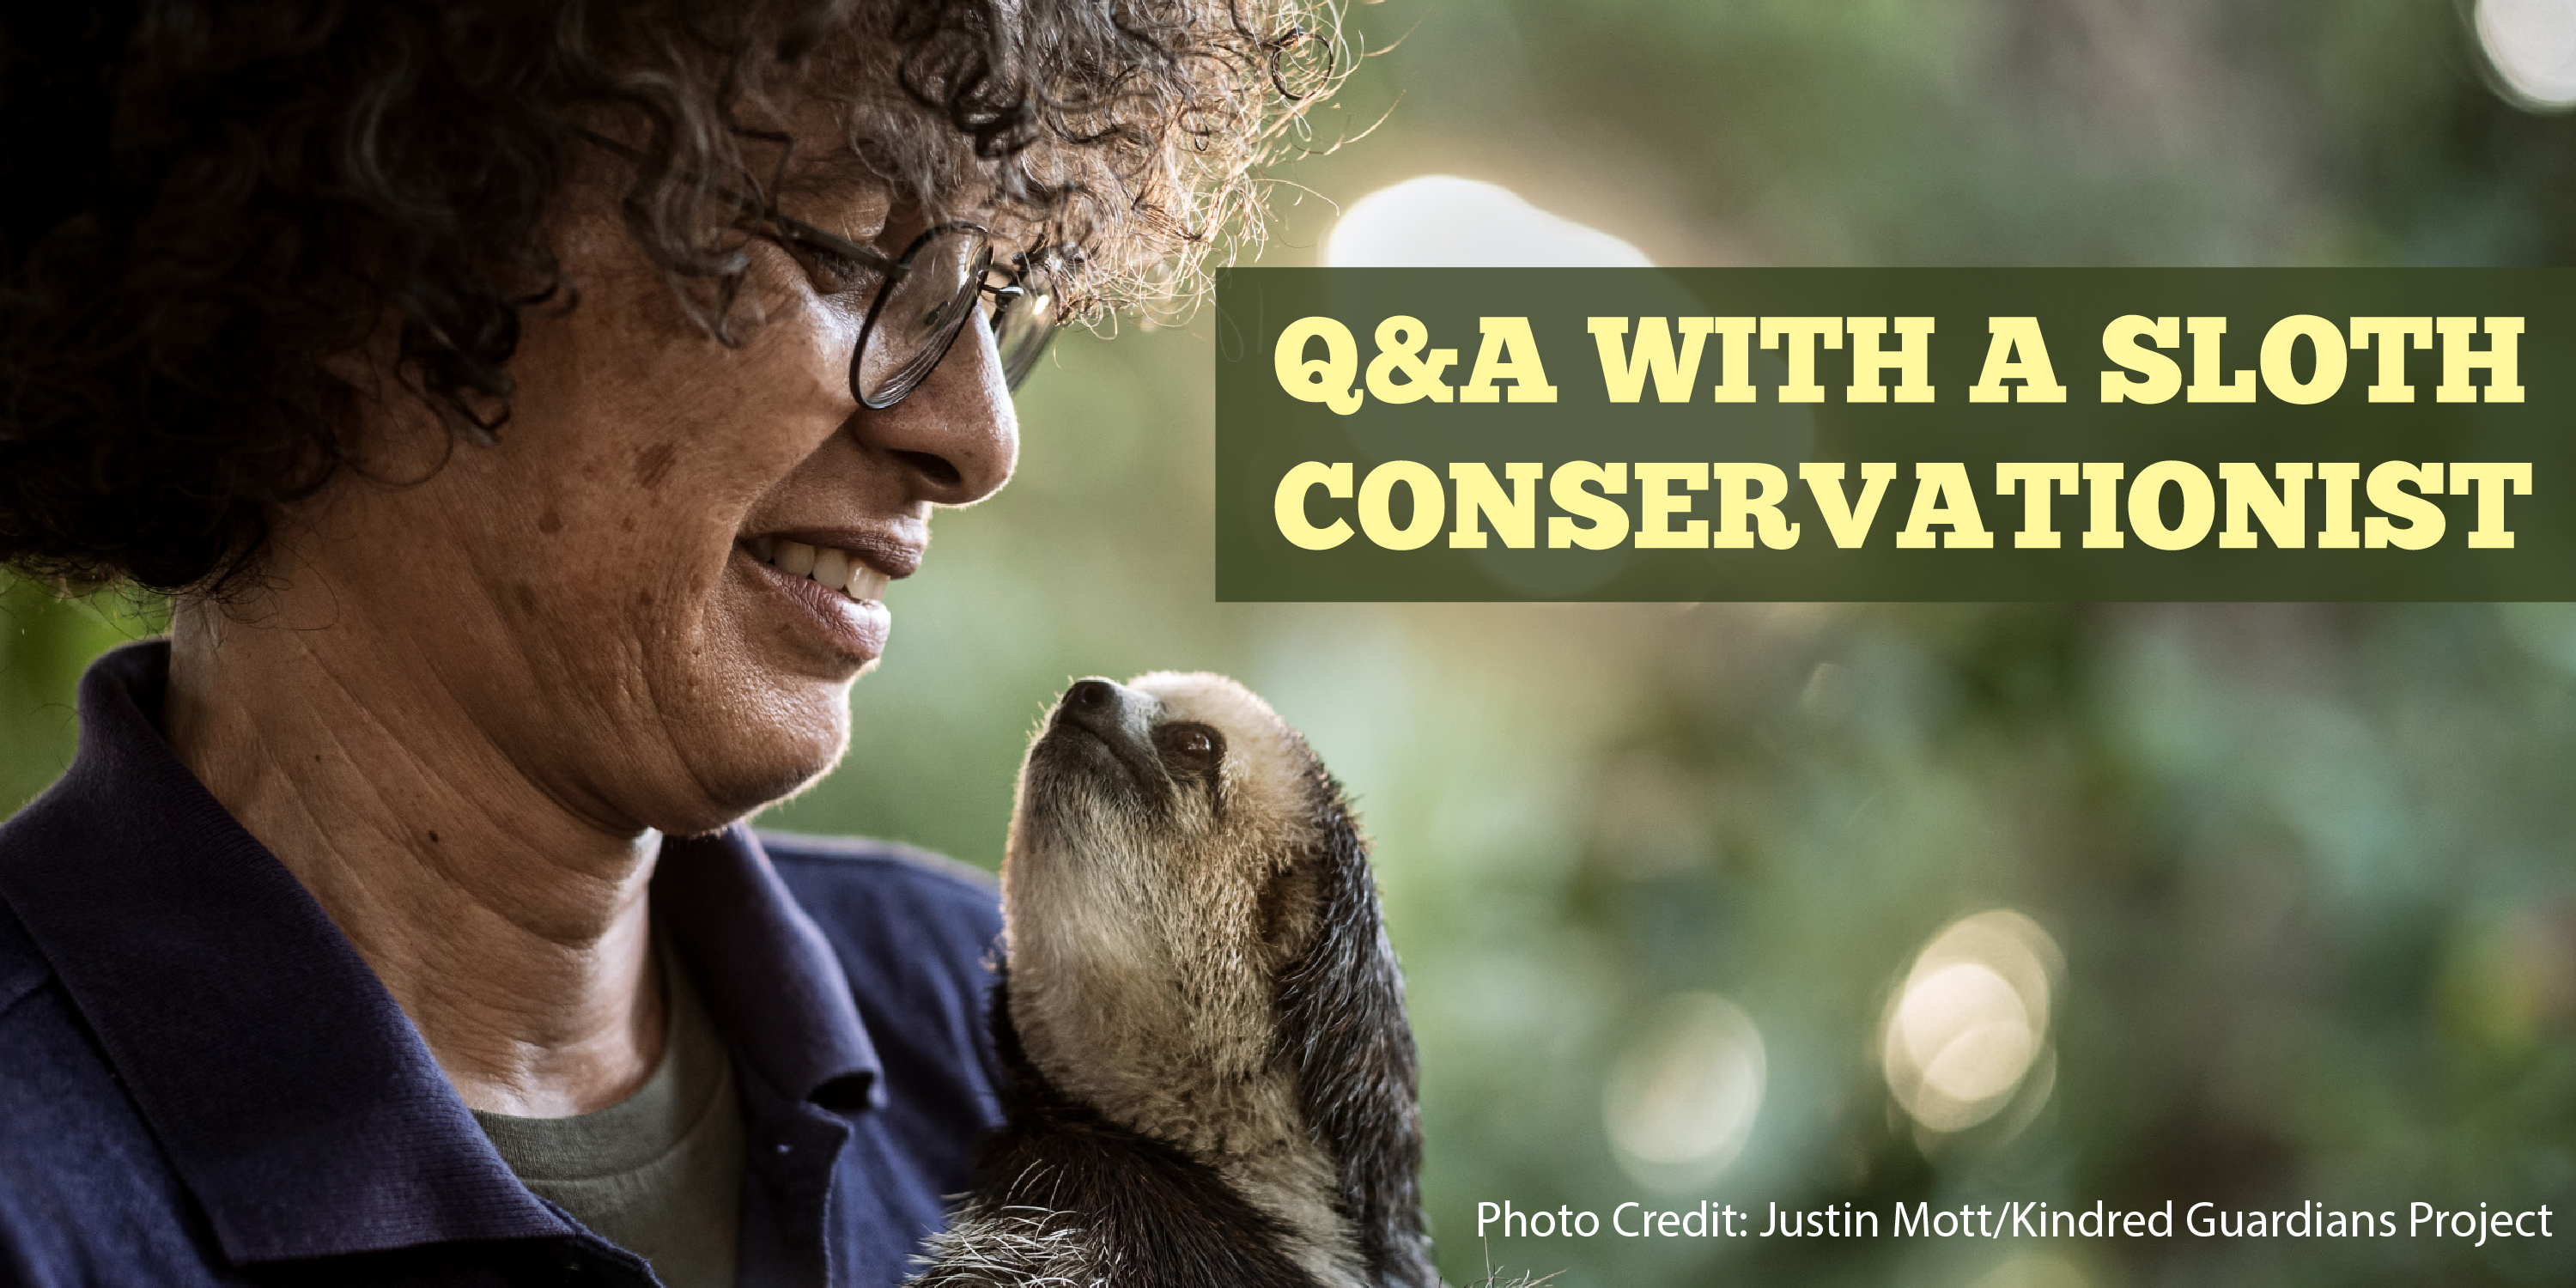 Q&A with a Sloth Conservationist. Photo Credit: Justin Mott/Kindred Guardians Project